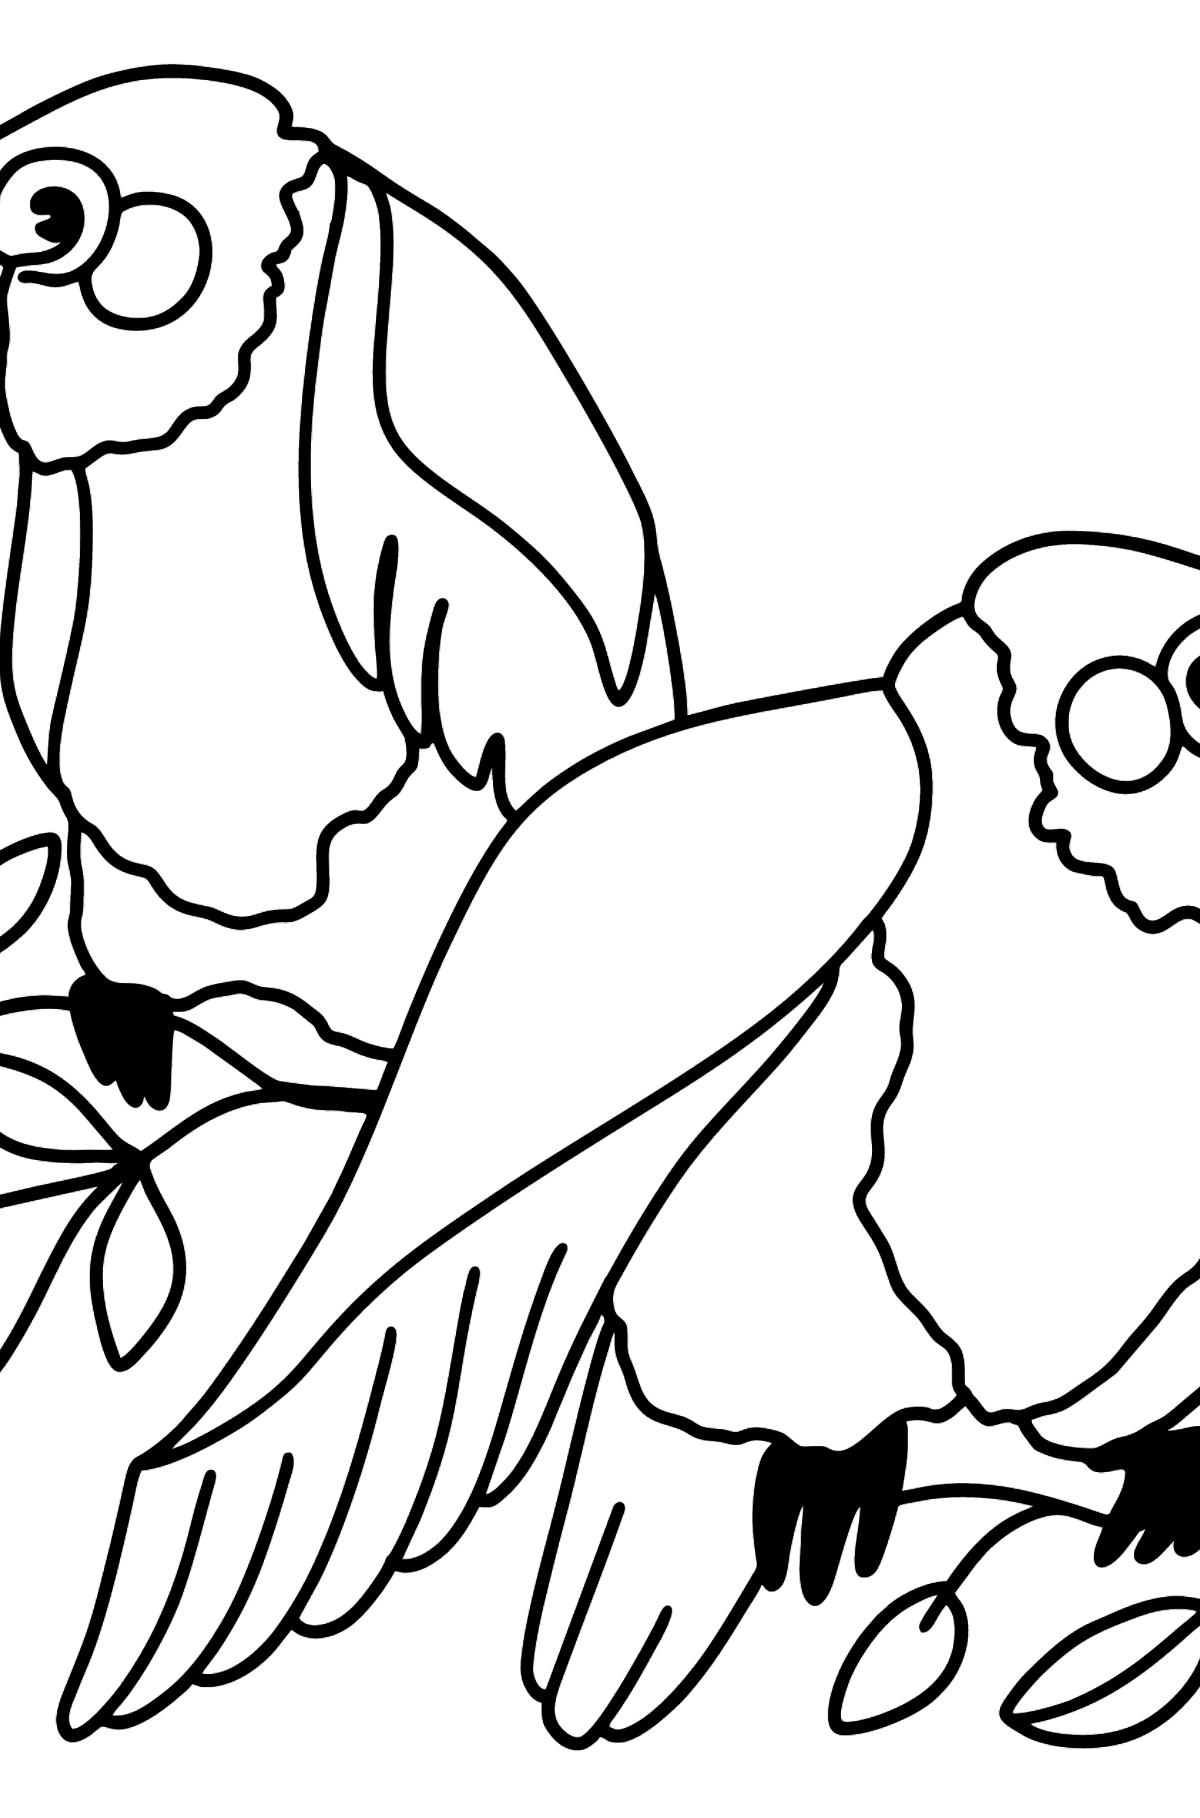 Two Parrots coloring page - Coloring Pages for Kids